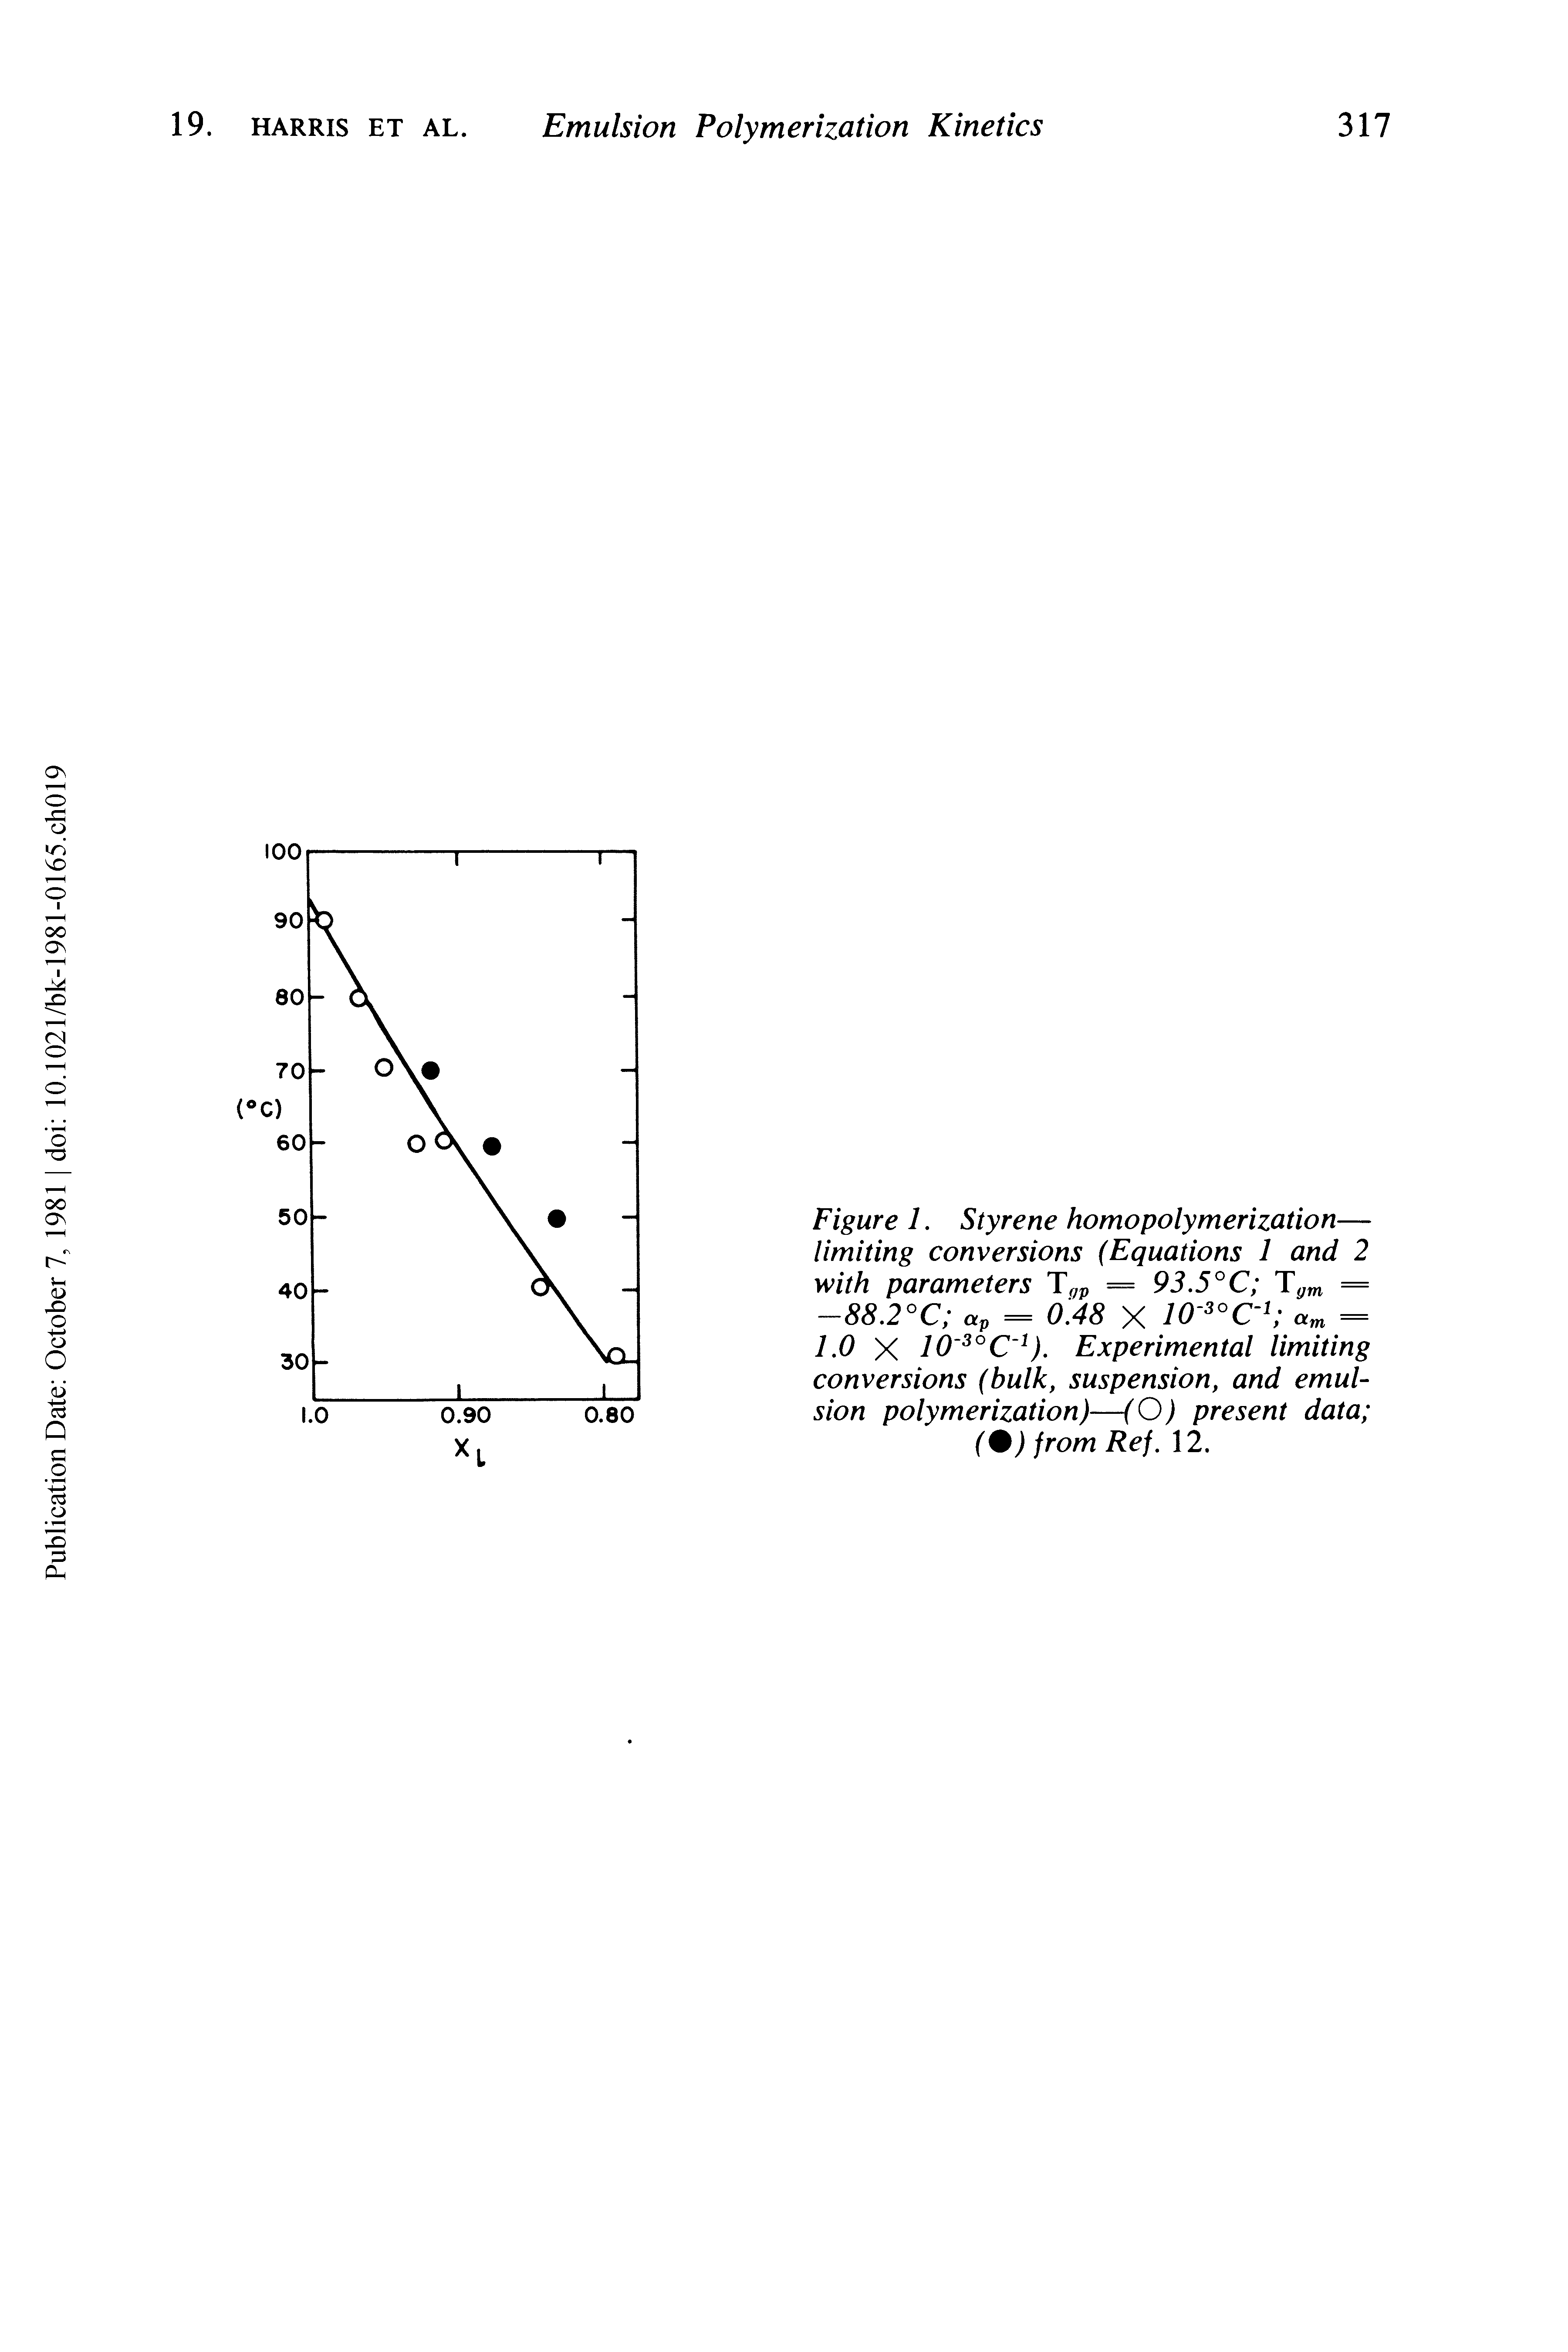 Figure 1. Styrene homopolymerization— limiting conversions (Equations 1 and 2 with parameters Tgp = 93.5°C Tym = -88.2°C atp = 0.48 X lO C 1 am = 1.0 X 10 3oC 1). Experimental limiting conversions (bulk, suspension, and emulsion polymerization)—(O) present data (%)from Ref. 12.